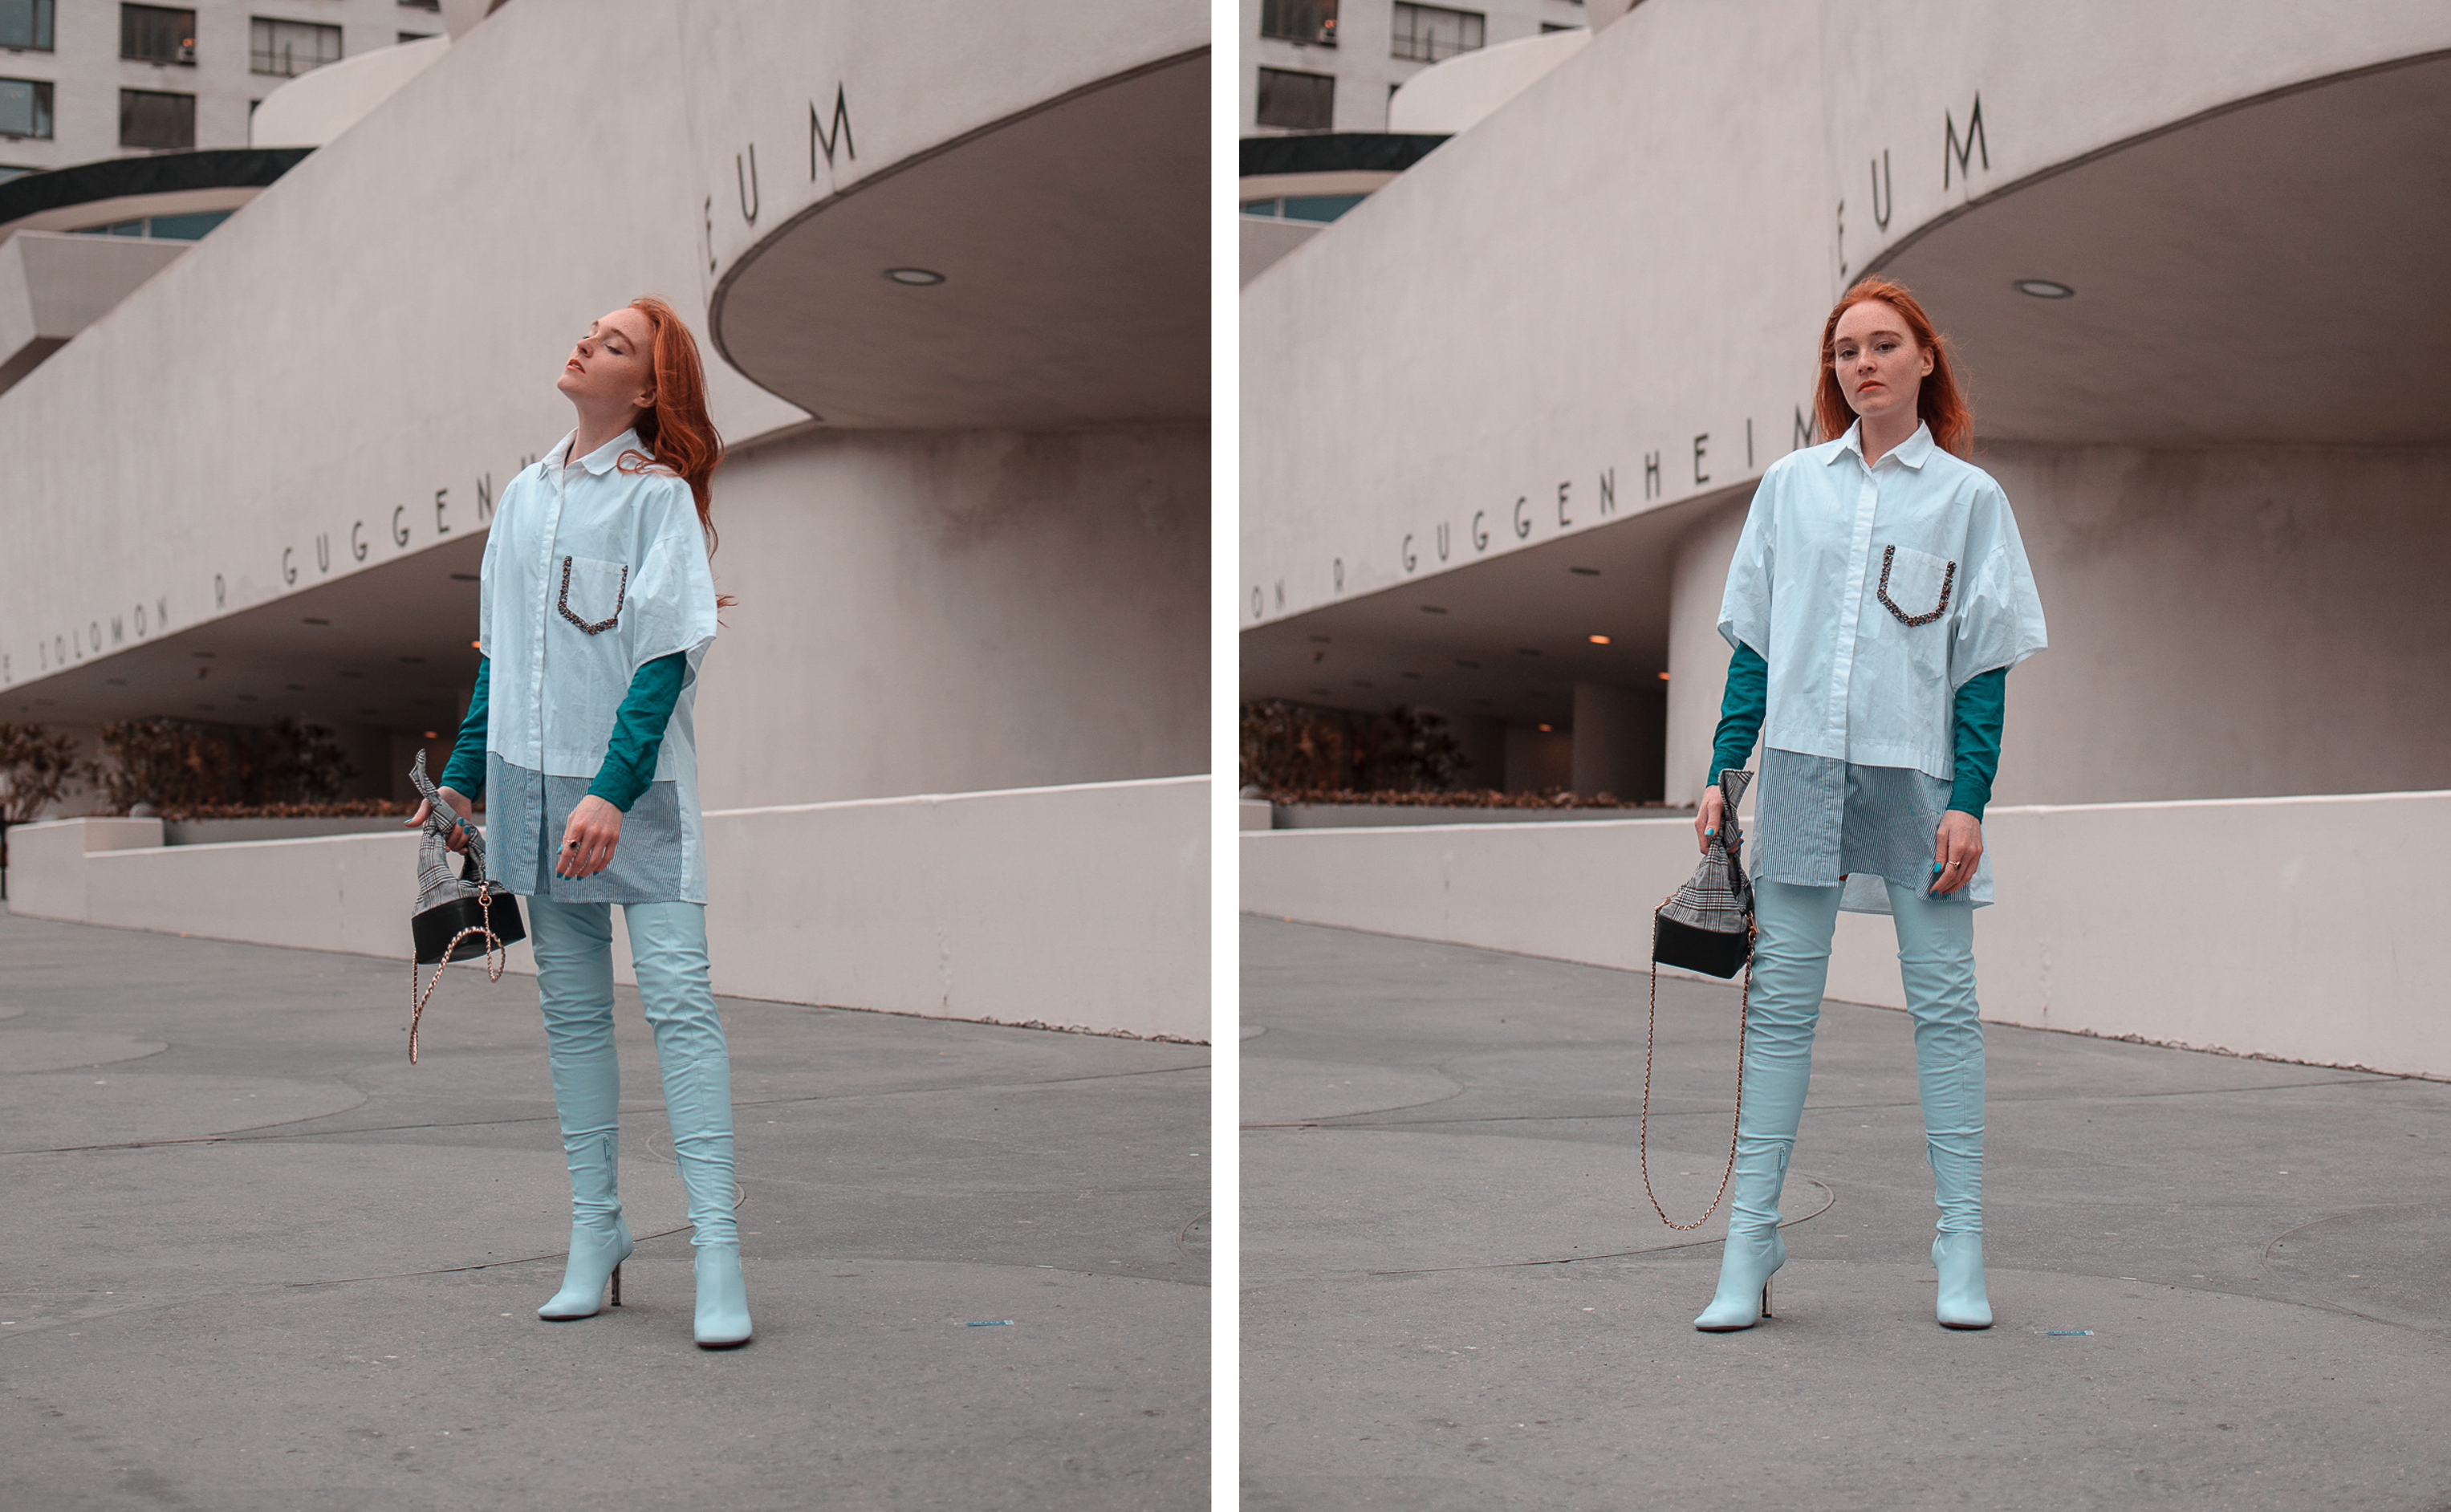 fashion blogger shooting at the guggenheim museum in nyc